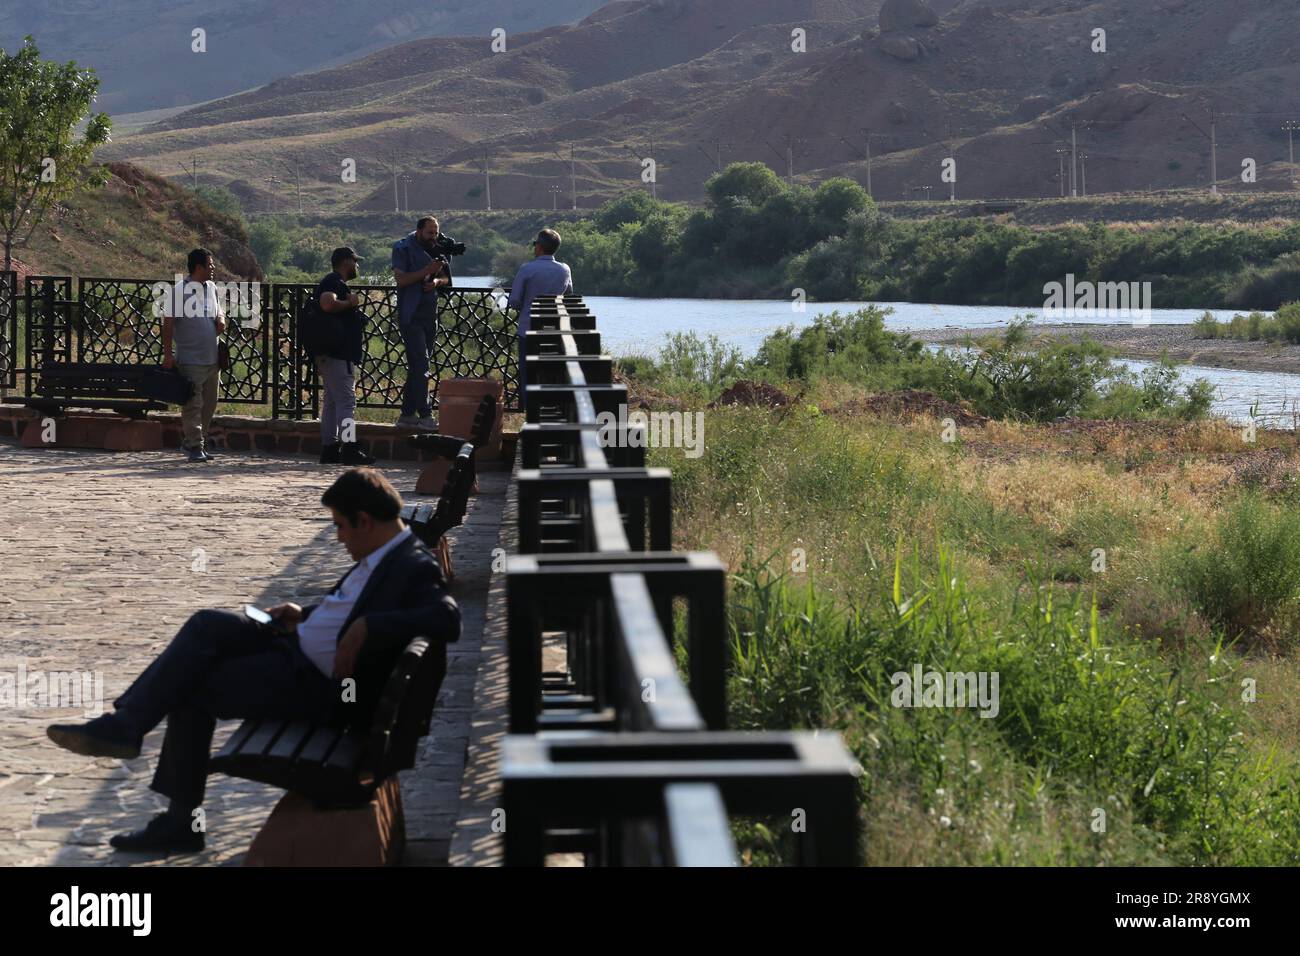 June 21, 2023, Jolfa, East Azerbaijan, Iran: People stand near the Aras River at the border between northwestern Iran and Azerbaijan. The Aras (the Araks, Arax, Araxes, or Araz) is a river in the Caucasus. It rises in eastern Turkey and flows along the borders between Turkey and Armenia, between Turkey and the Nakhchivan exclave of Azerbaijan, between Iran and both Azerbaijan and Armenia, and, finally, through Azerbaijan where it flows into the Kura River. It drains the south side of the Lesser Caucasus Mountains while the Kura drains the north side of the Lesser Caucasus. The river's total le Stock Photo